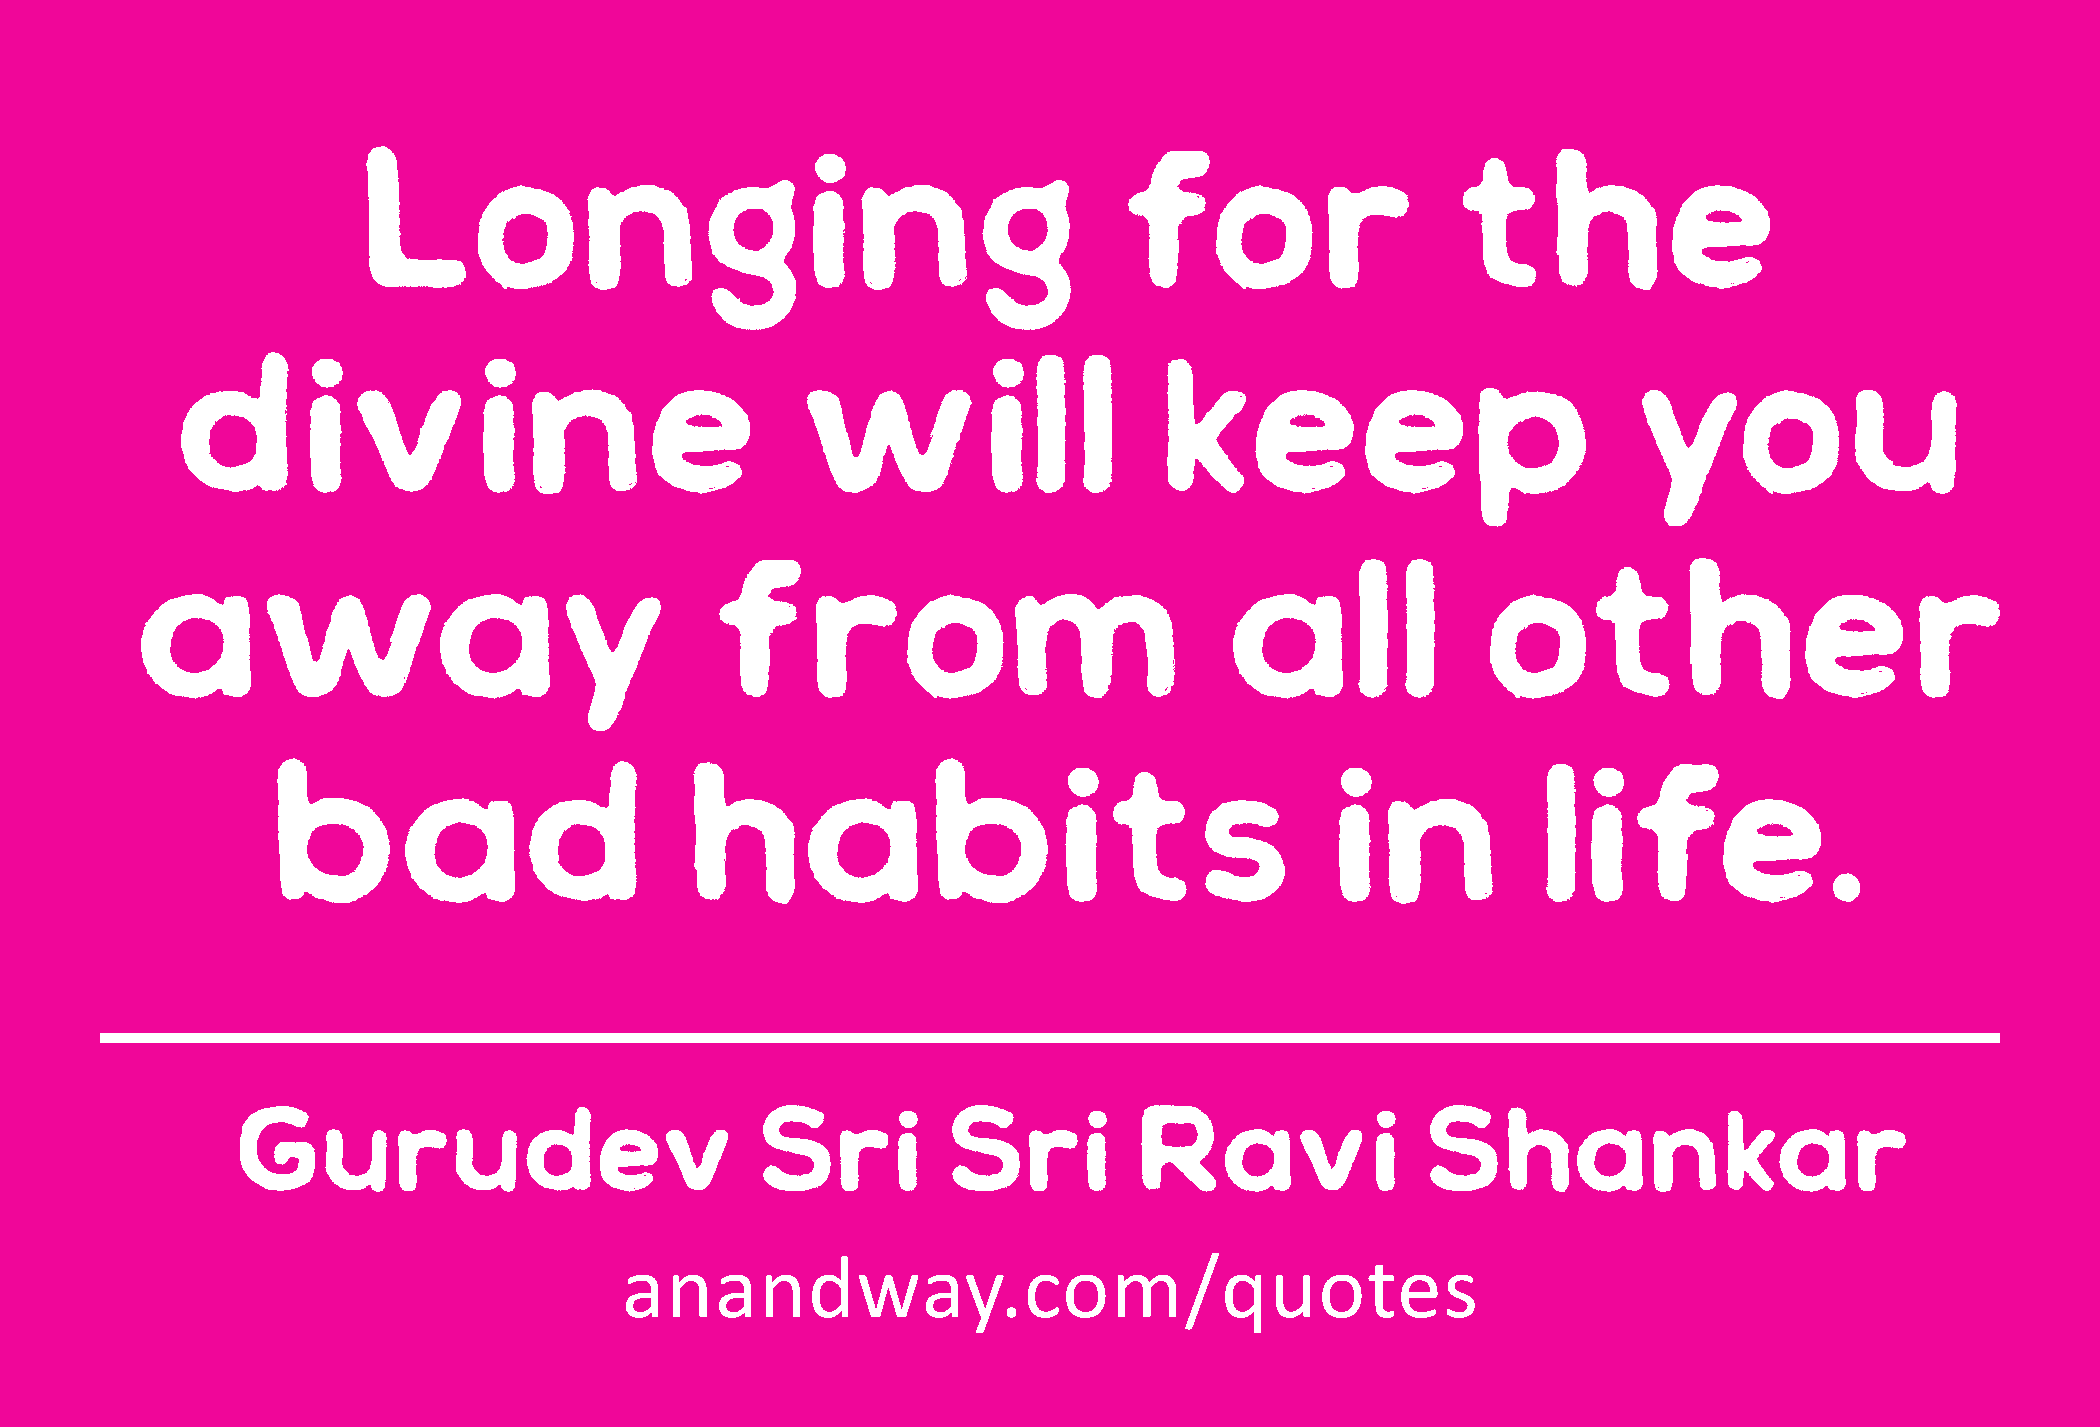 Longing for the divine will keep you away from all other bad habits in life. 
 -Gurudev Sri Sri Ravi Shankar